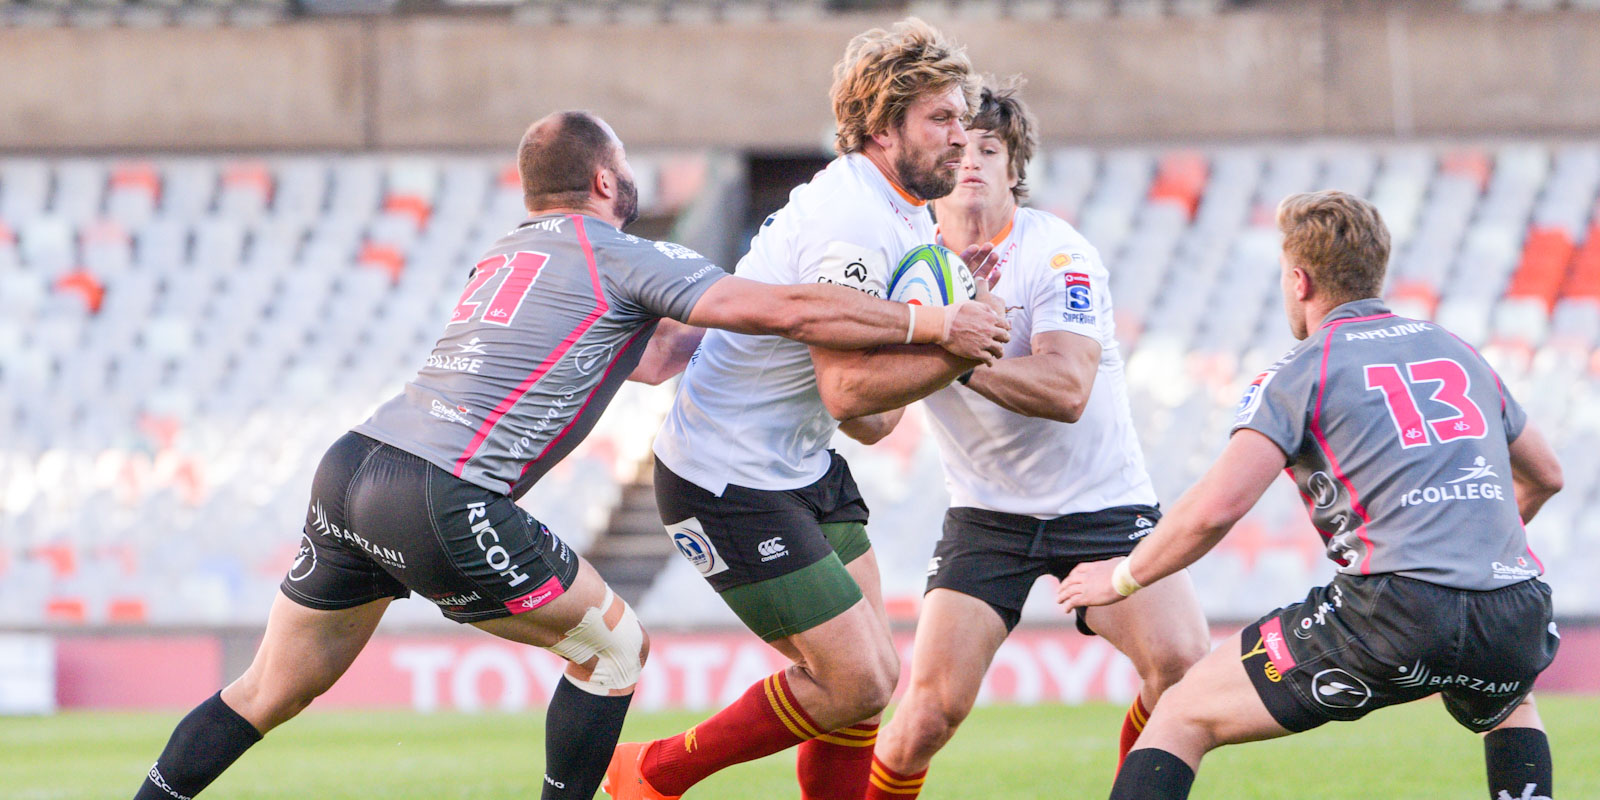 Frans Steyn was in great form in his competitive debut for the Toyota Cheetahs